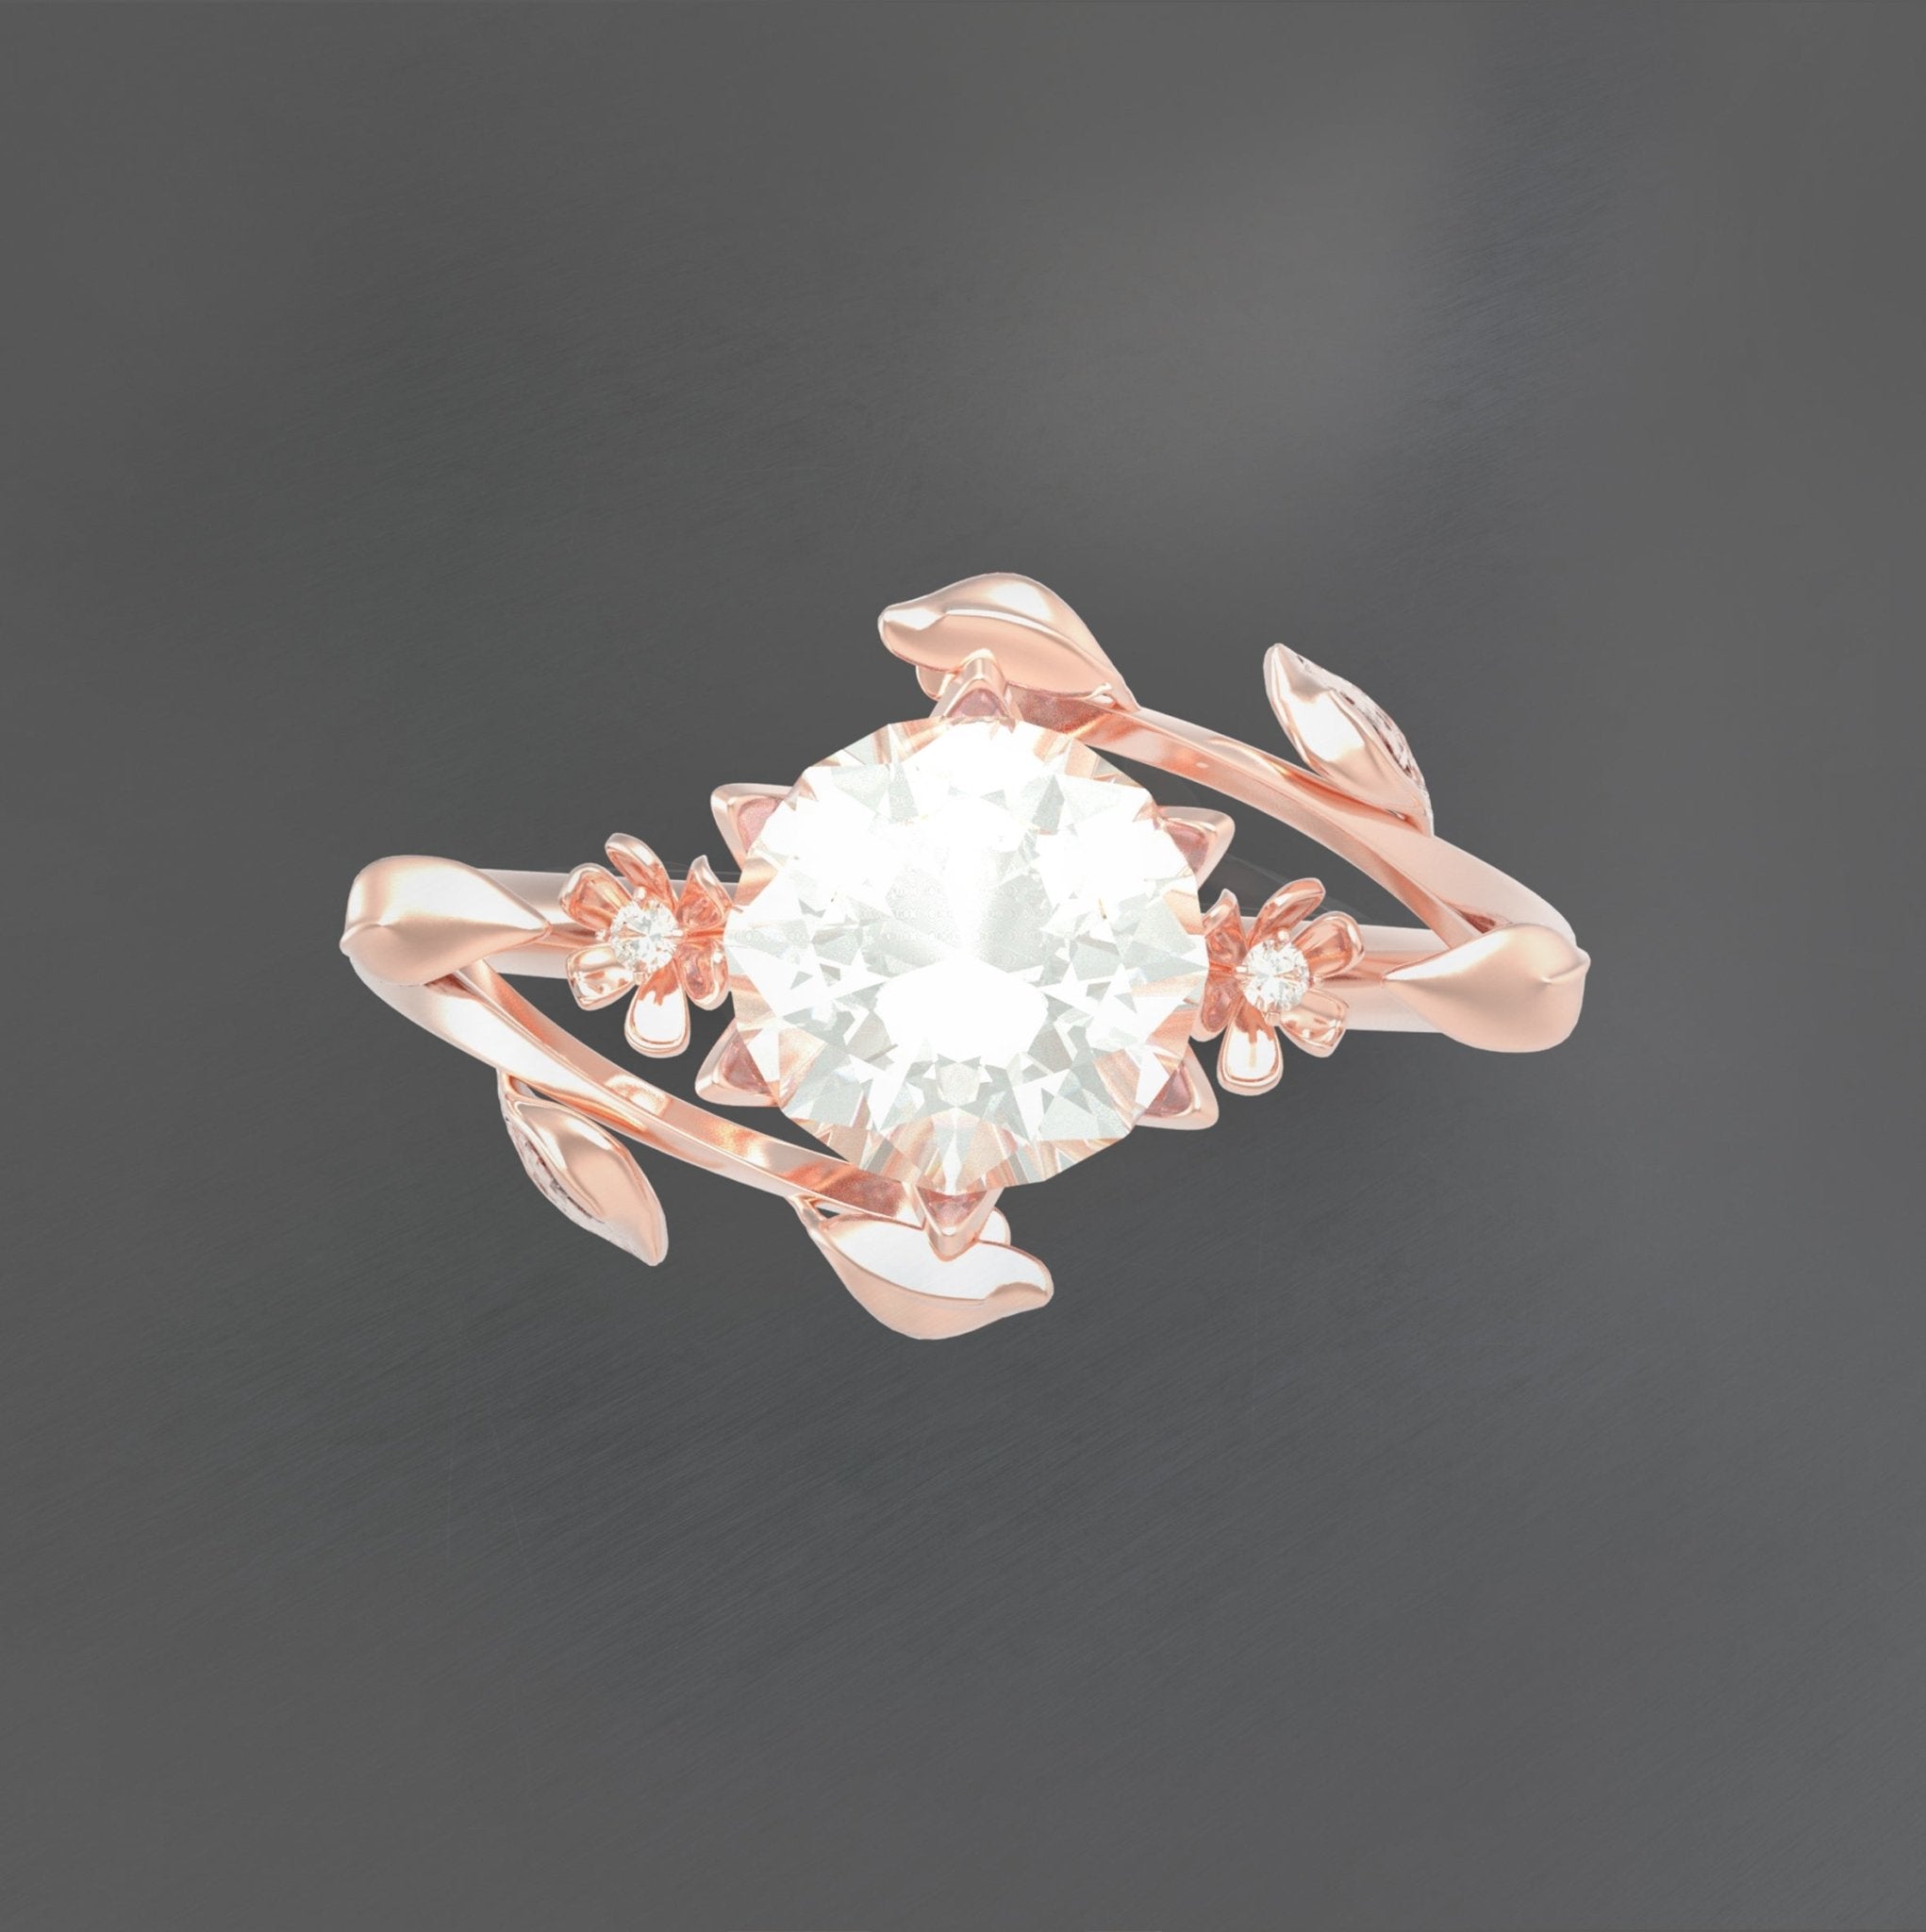 Unique Symmetrical Flowers and Leaves Engagement Ring No.68 in Rose Gold - Moissanite/Diamond - Roelavi